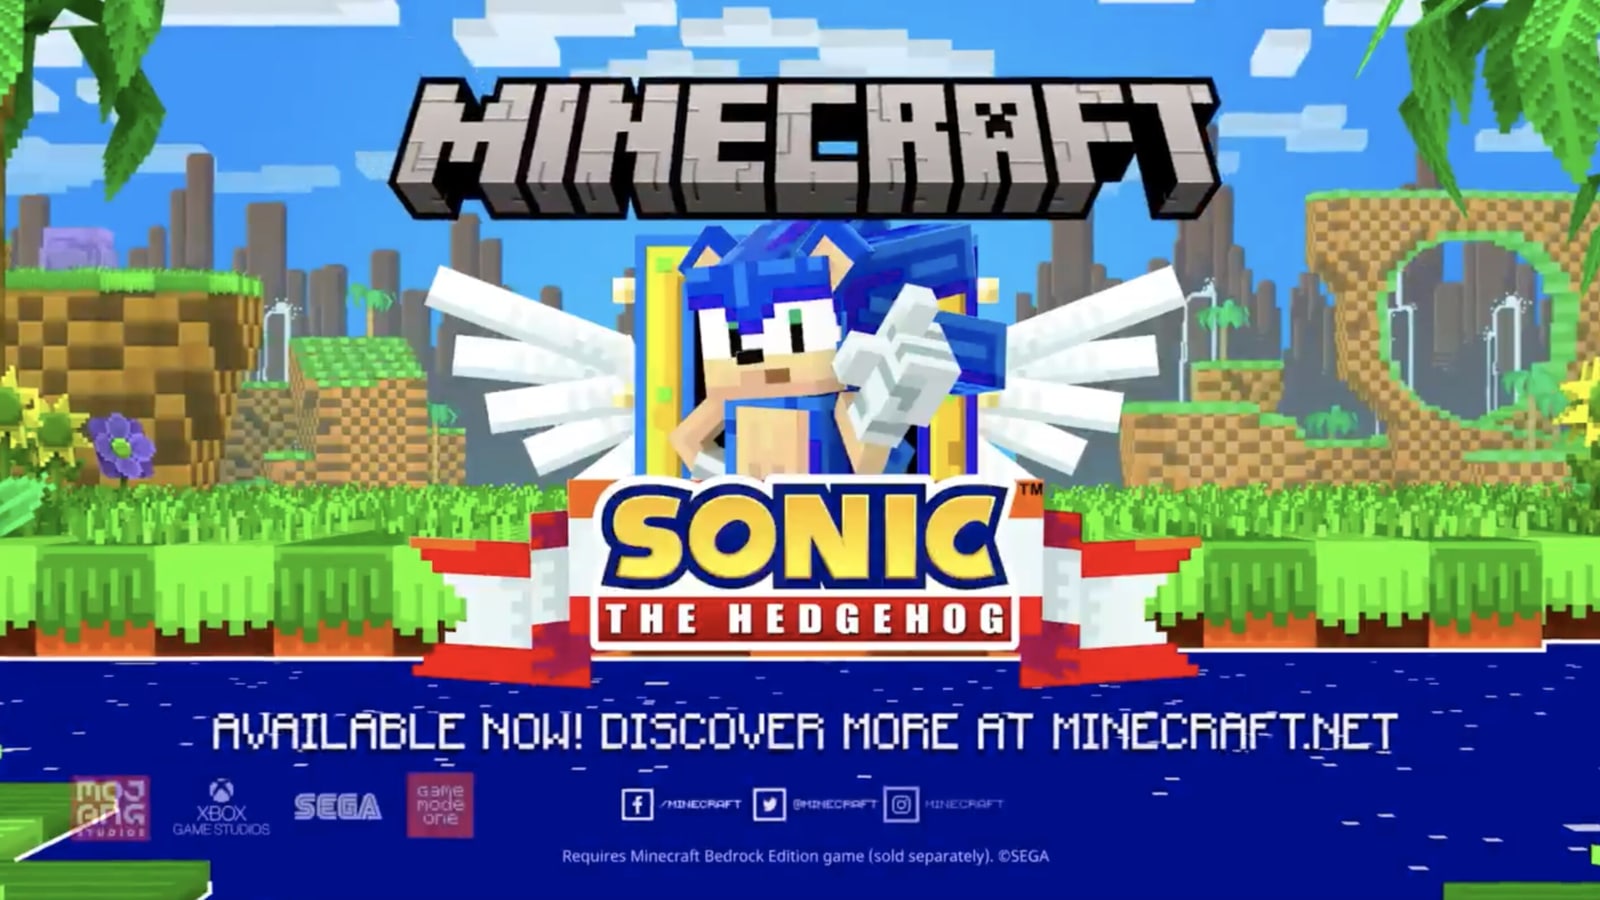 Sonic The Hedgehog Game Is Available On Minecraft Now Through A New Dlc Pack Ht Tech